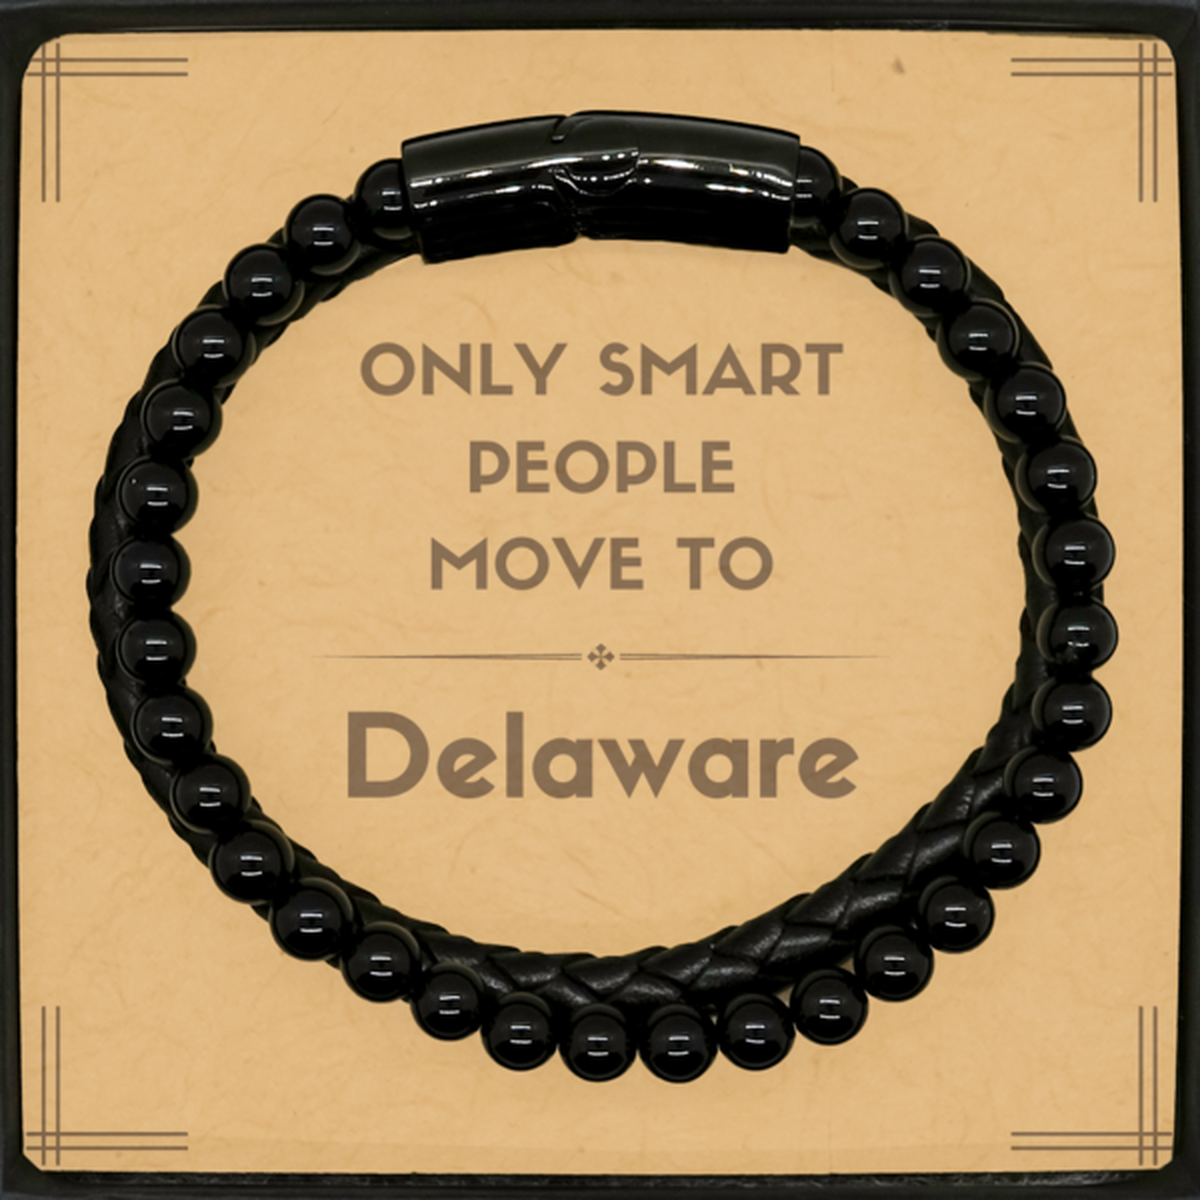 Only smart people move to Delaware Stone Leather Bracelets, Message Card Gifts For Delaware, Move to Delaware Gifts for Friends Coworker Funny Saying Quote